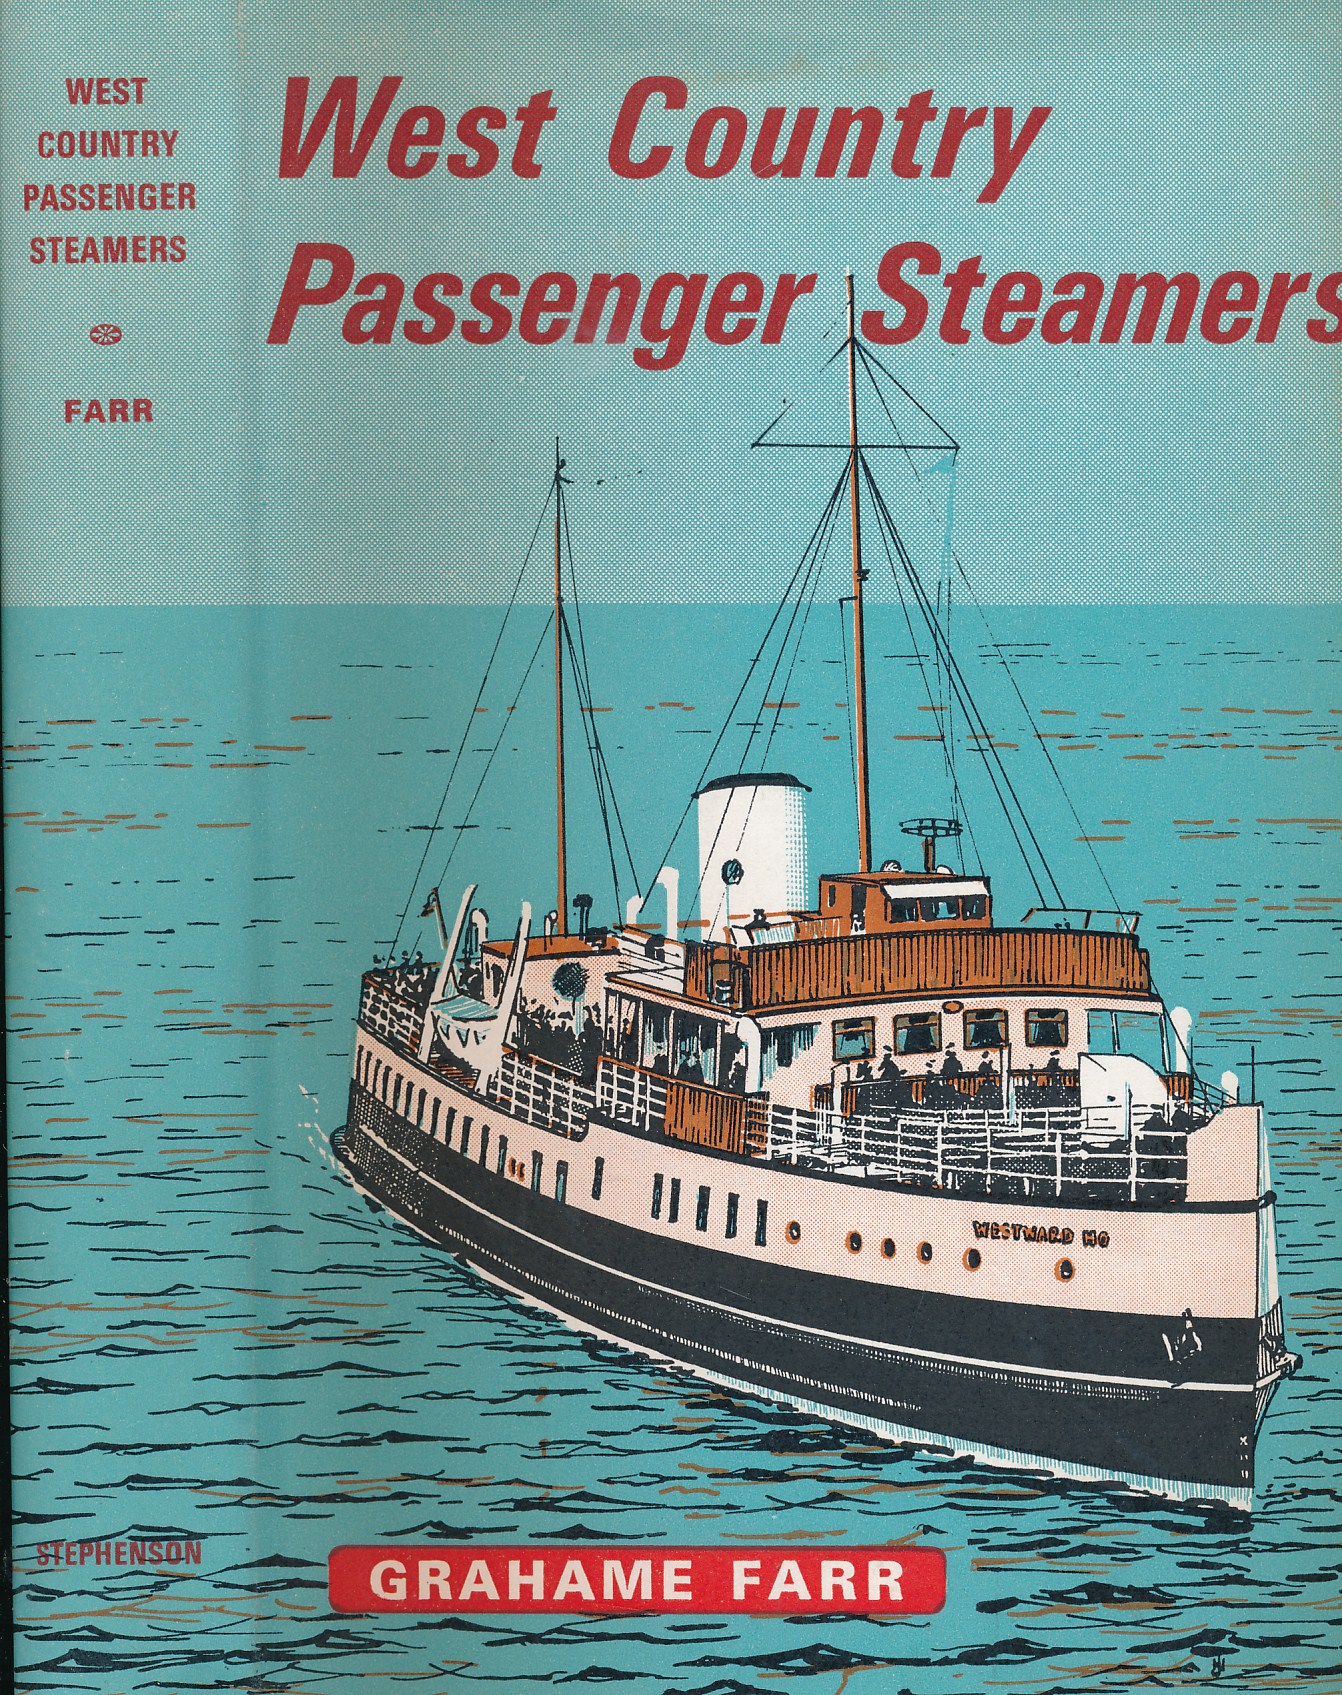 West Country Passenger Steamers